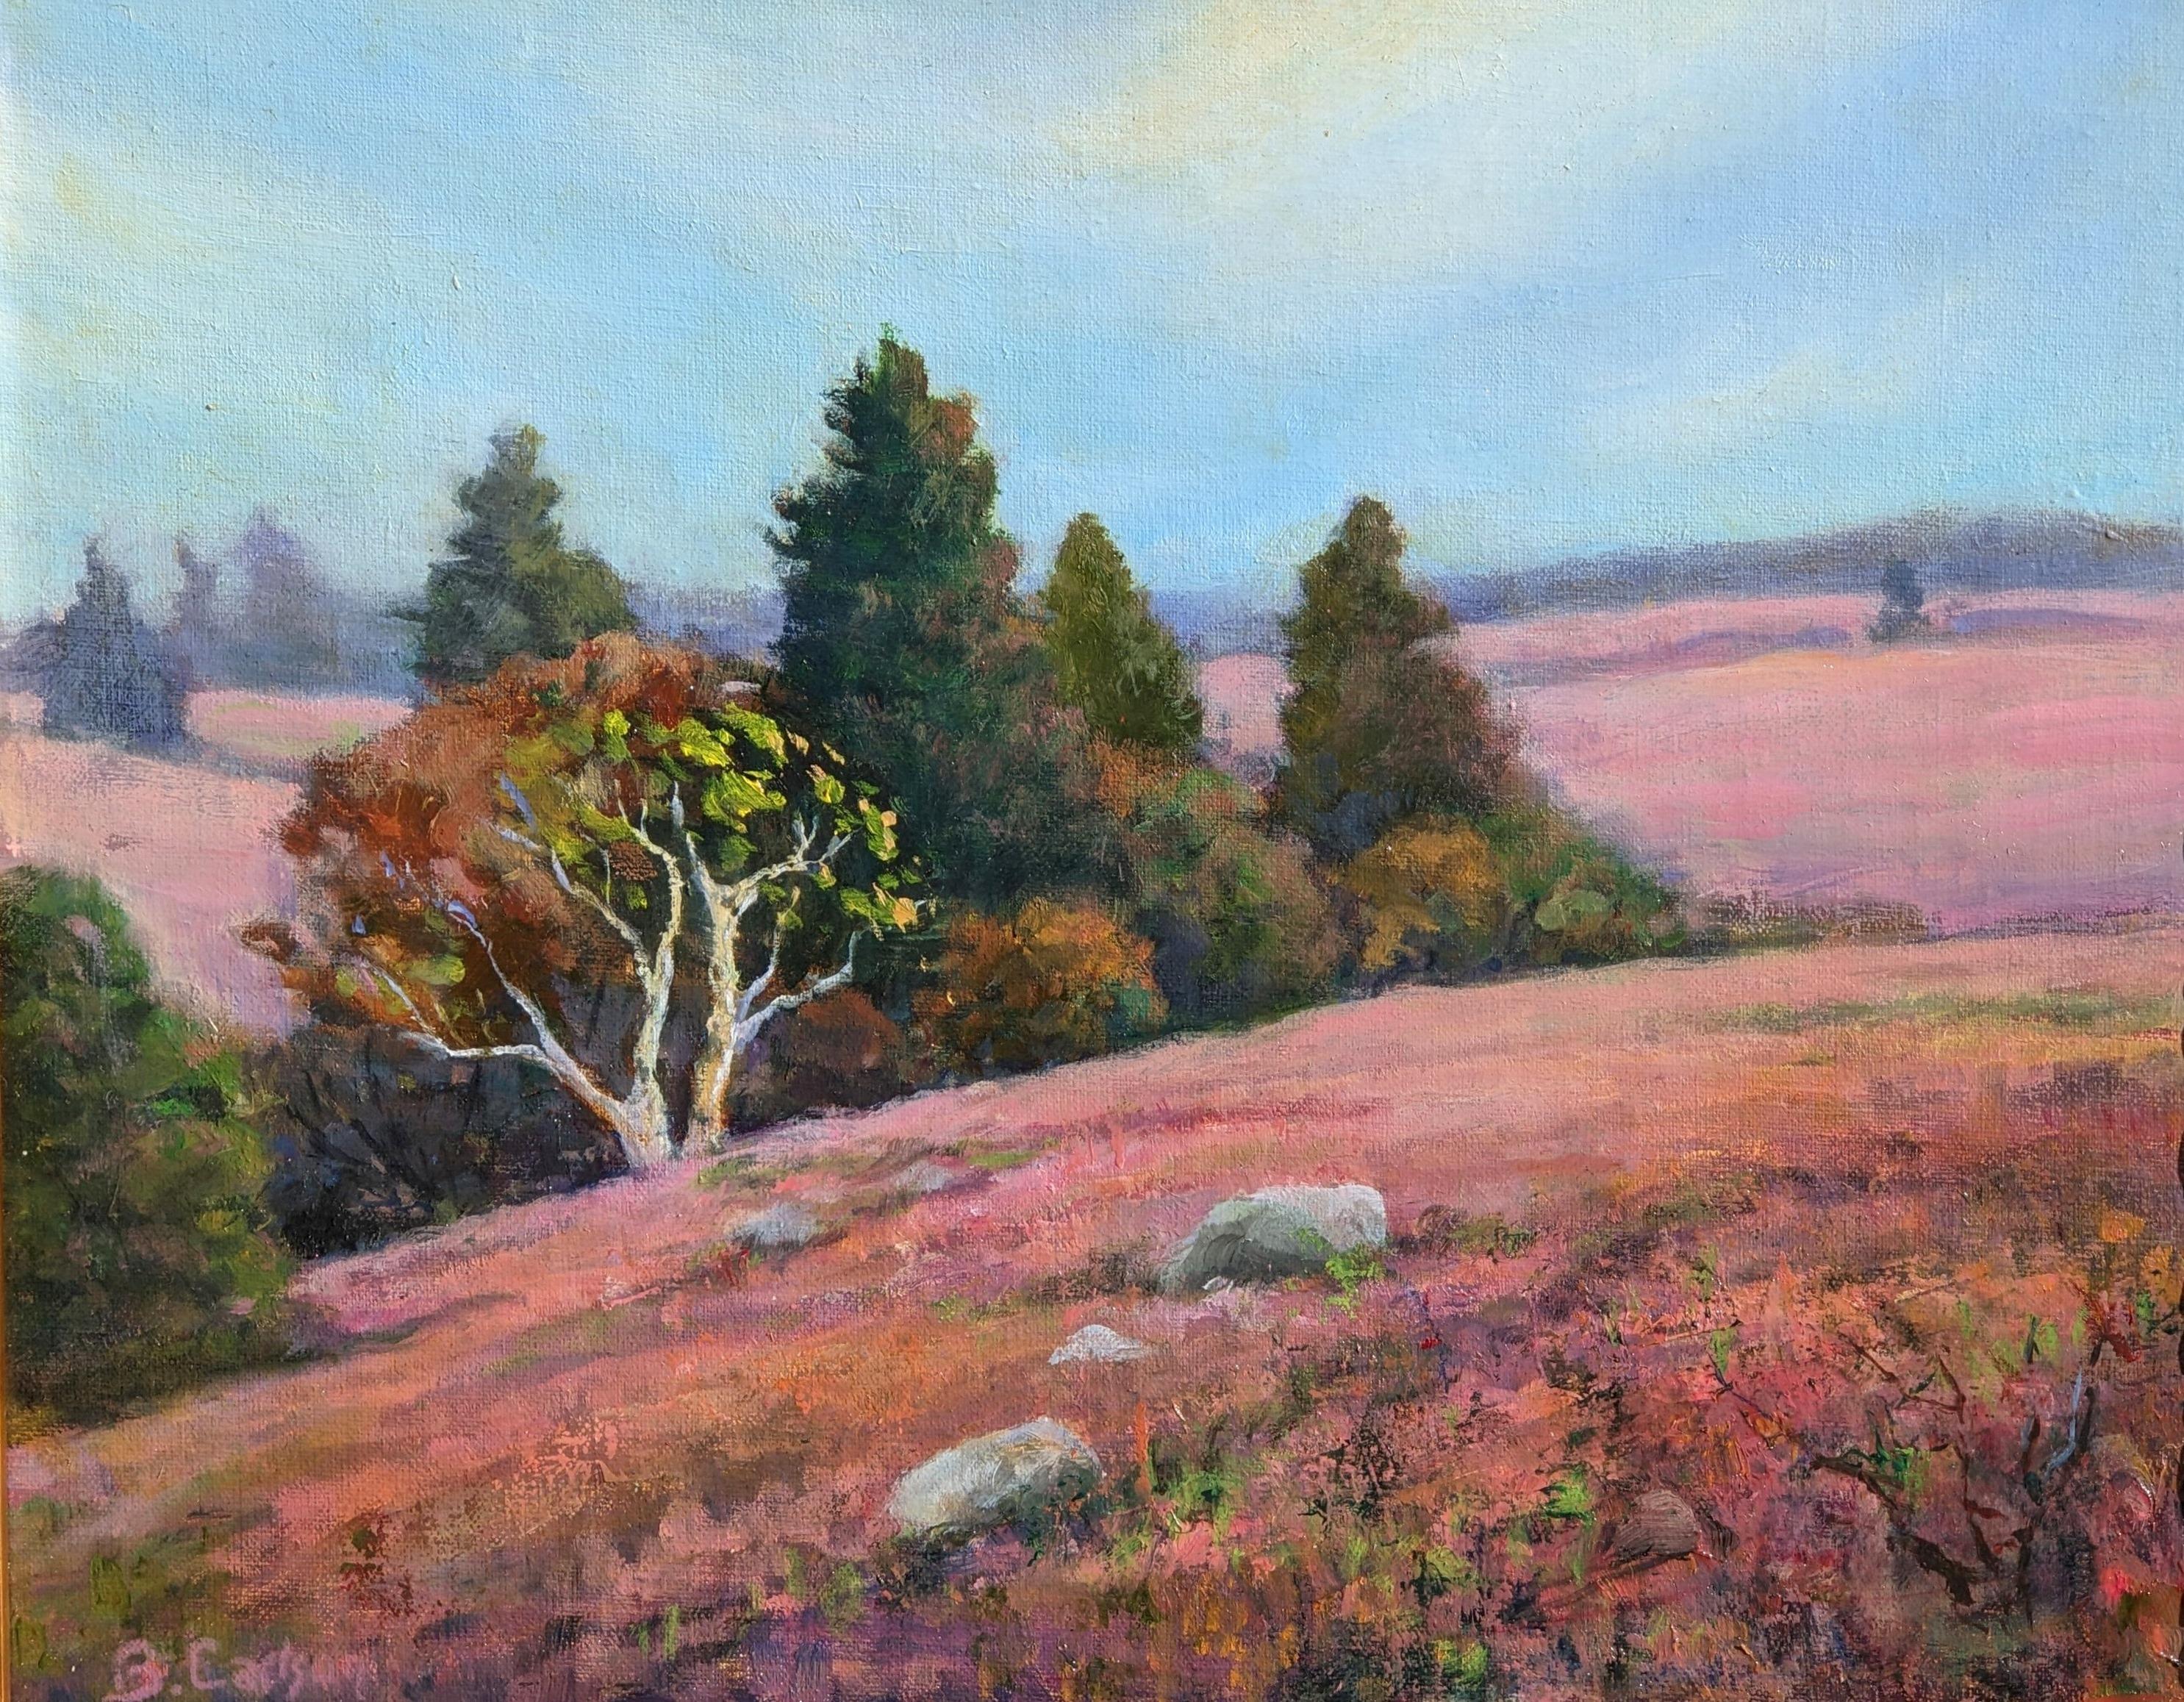 Stunning Red Blueberry Barrens in Fall Create An Otherworldly Effect in Maine - Painting by Beth Carlson